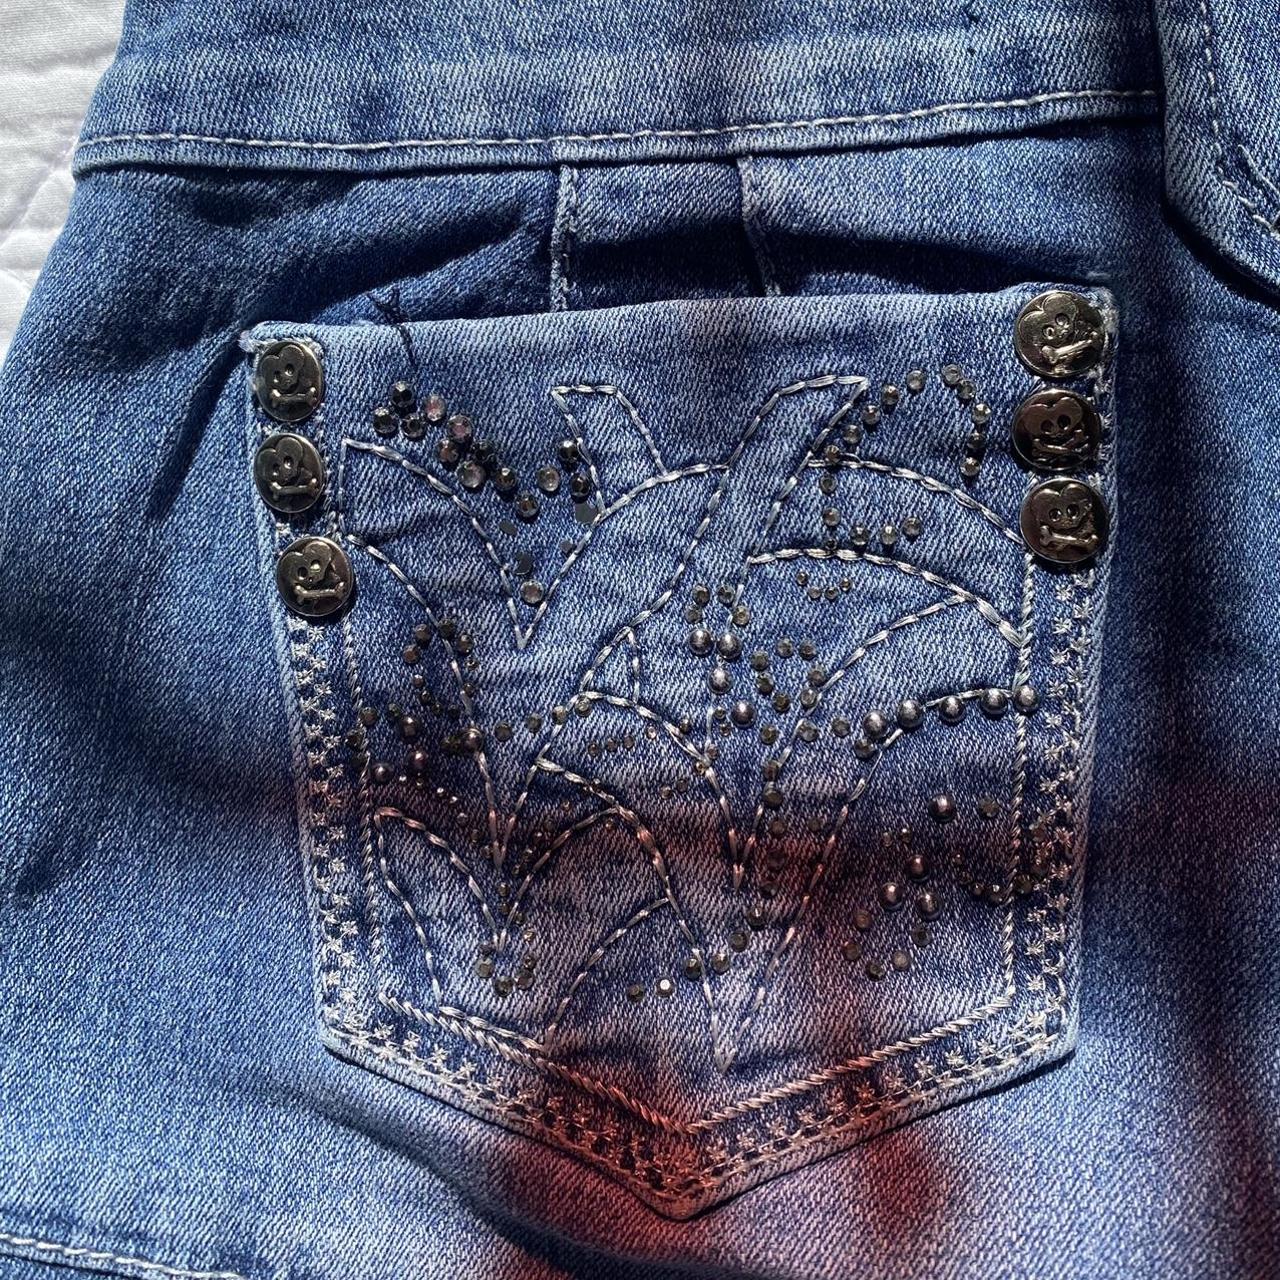 y2k bedazzled denim shorts size: 3 fits like small - Depop